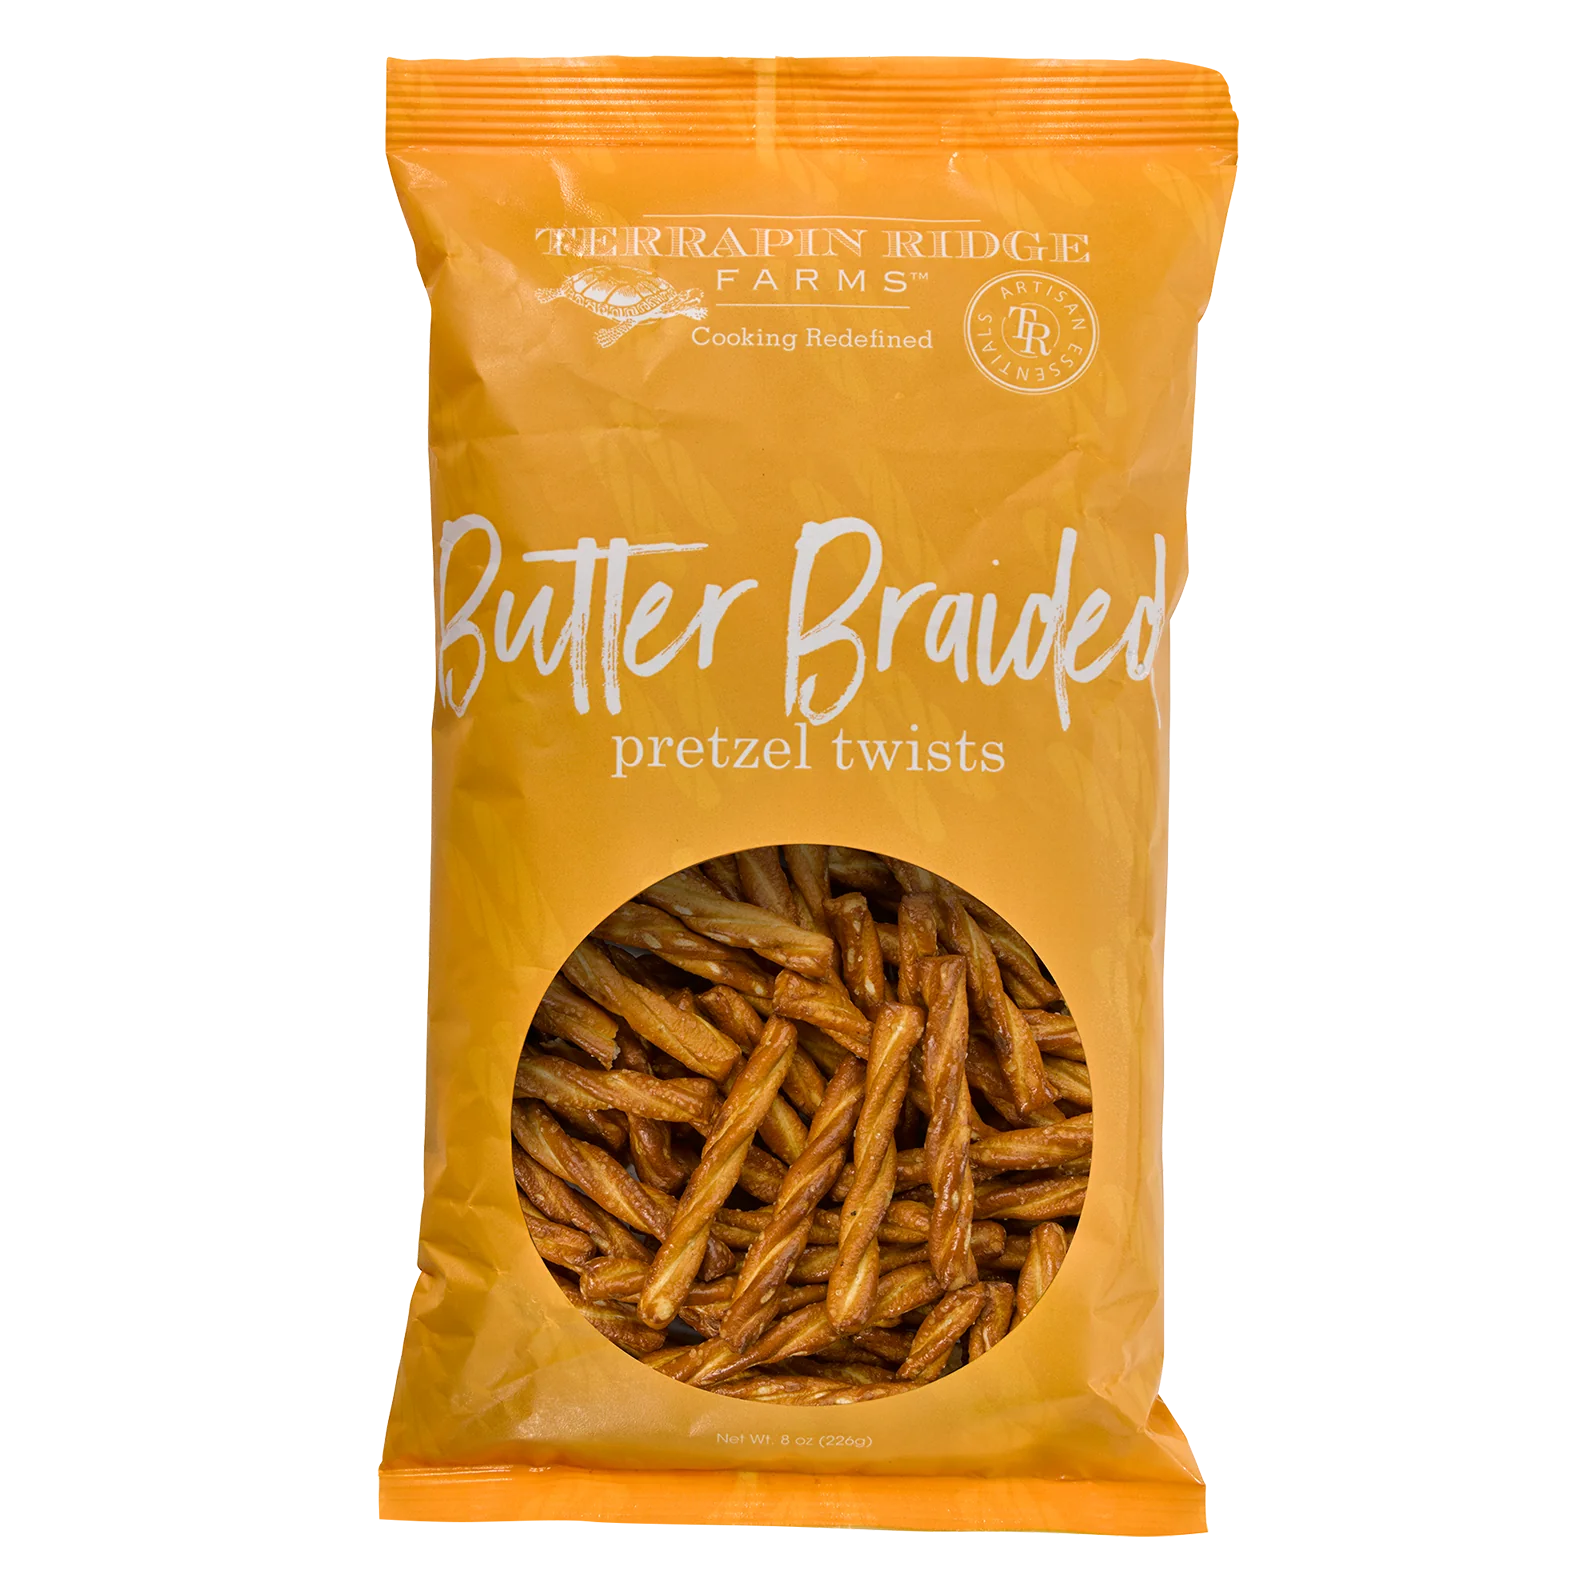 A bag of Terrapin Ridge Braided Pretzel Twists on a white background, accompanied by Nashville Hot spice and creamy mustard.